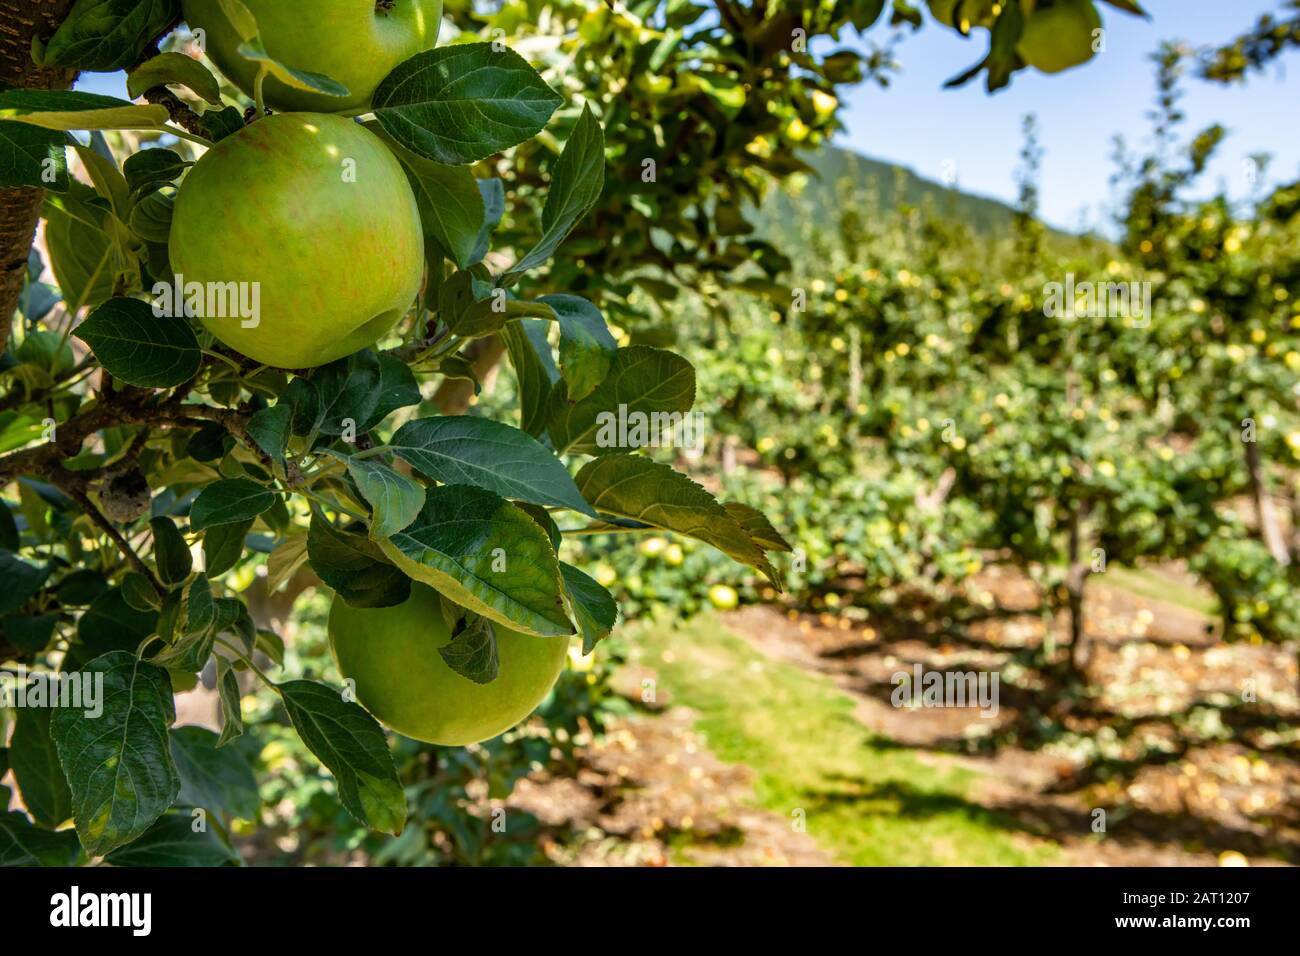 Green apples on the tree branch close up and selective focus with leaves against orchard trees background, Okanagan Valley, British Columbia, Canada Stock Photo